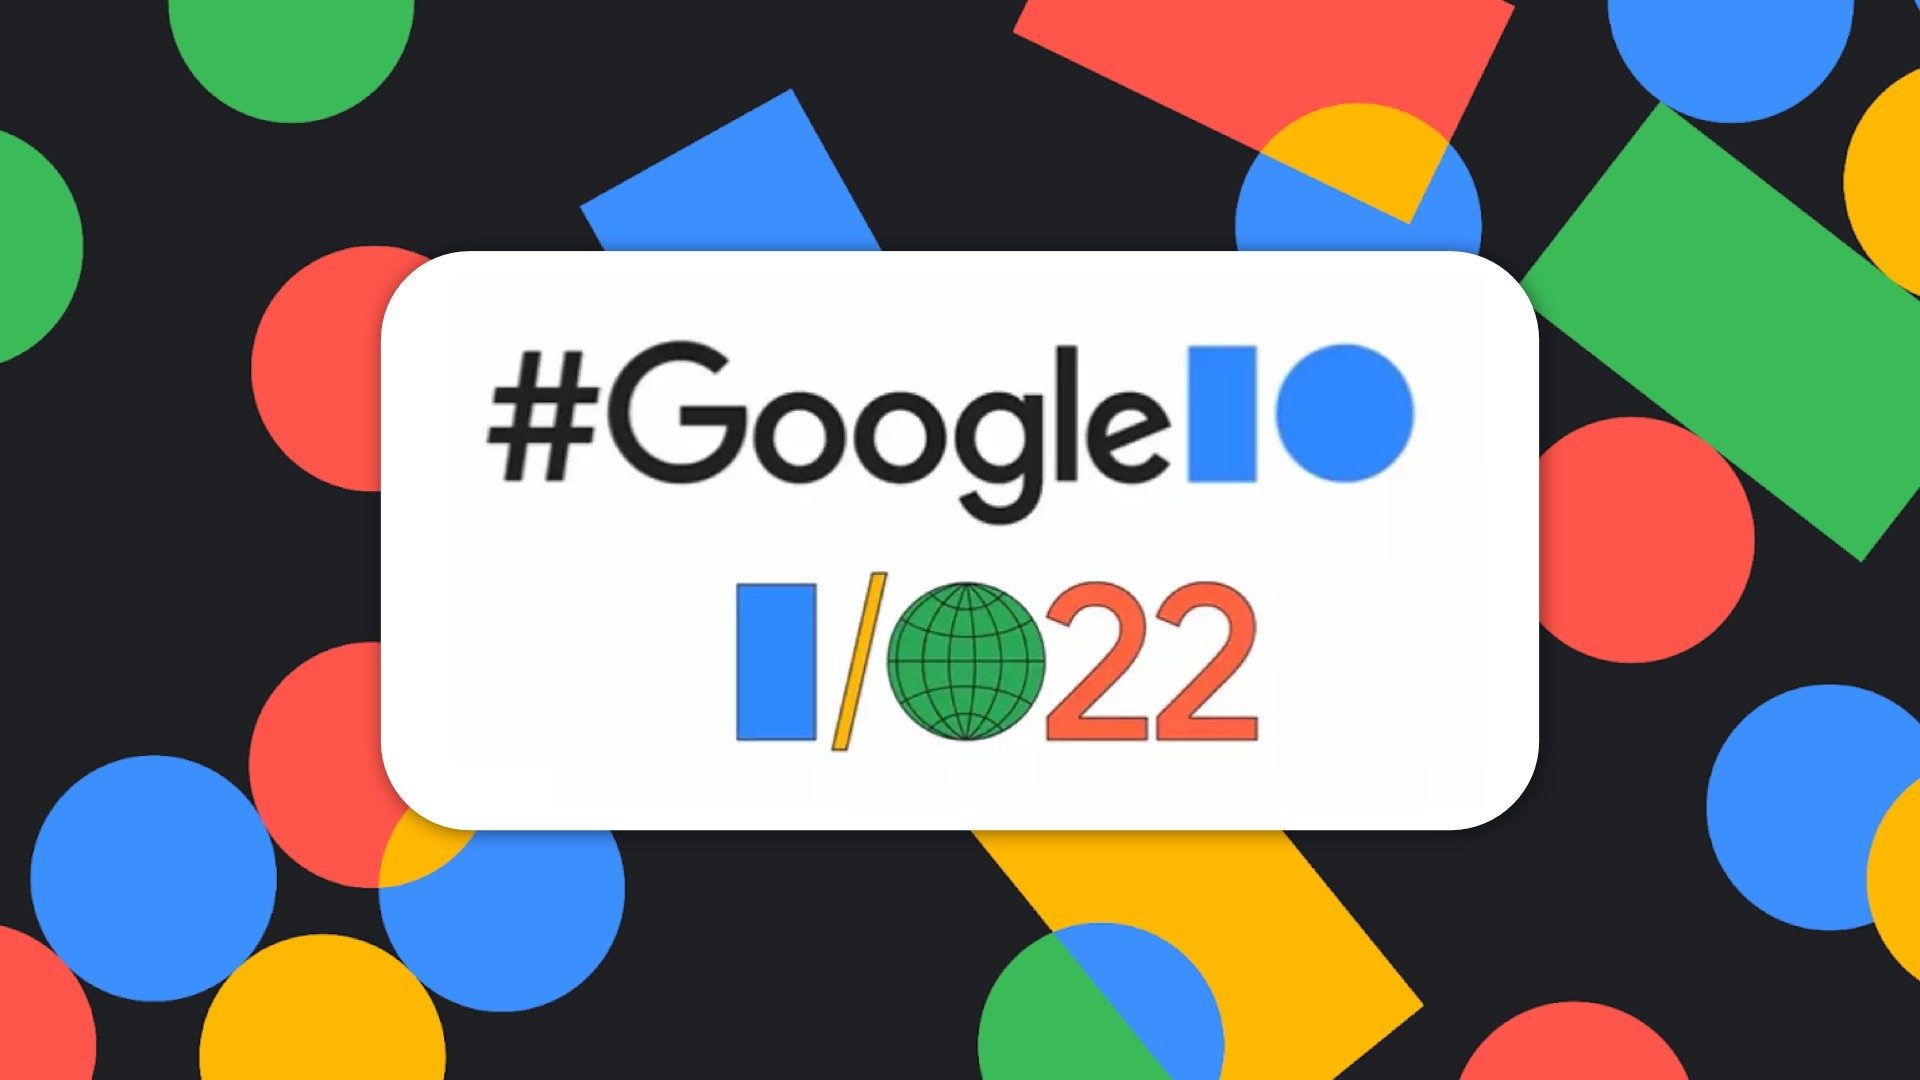 Google I/O 2022: Android 13, Pixel 6a, Pixel Watch, and what else to expect